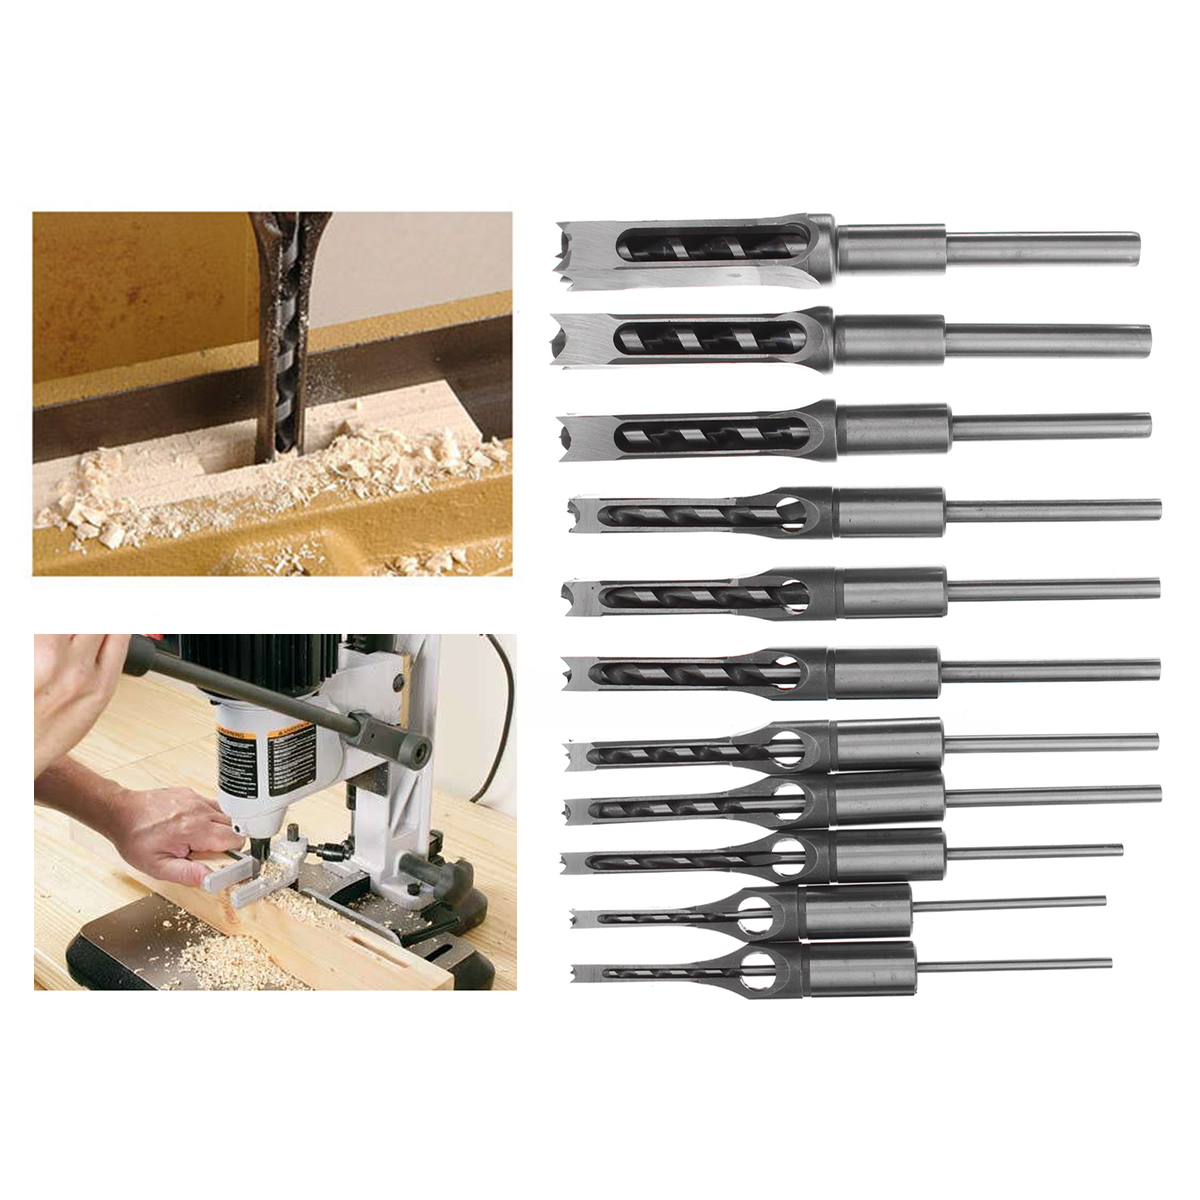 6-19mm-Woodworking-Drill-Bit-Square-Hole-Chisel-Mortising-Kit-Tenon-Wood-Tool-1615910-2